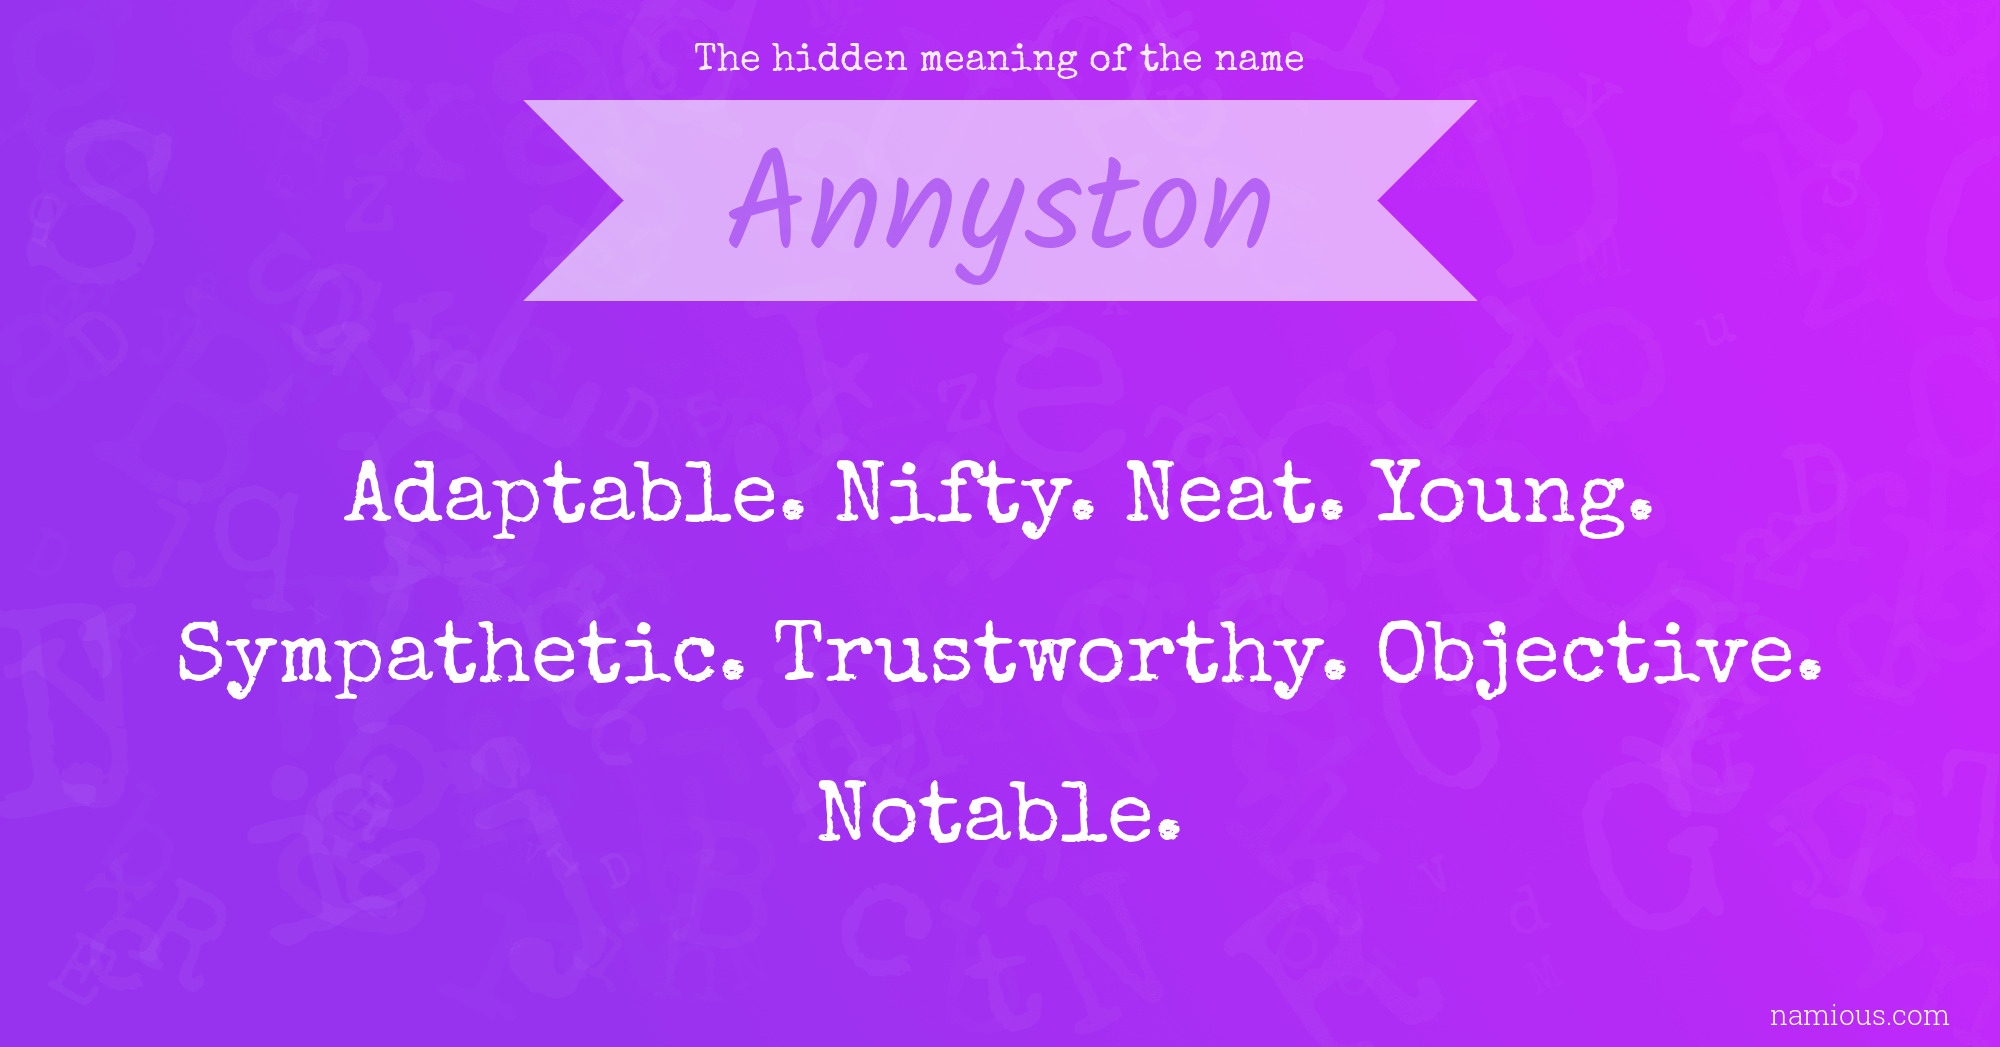 The hidden meaning of the name Annyston